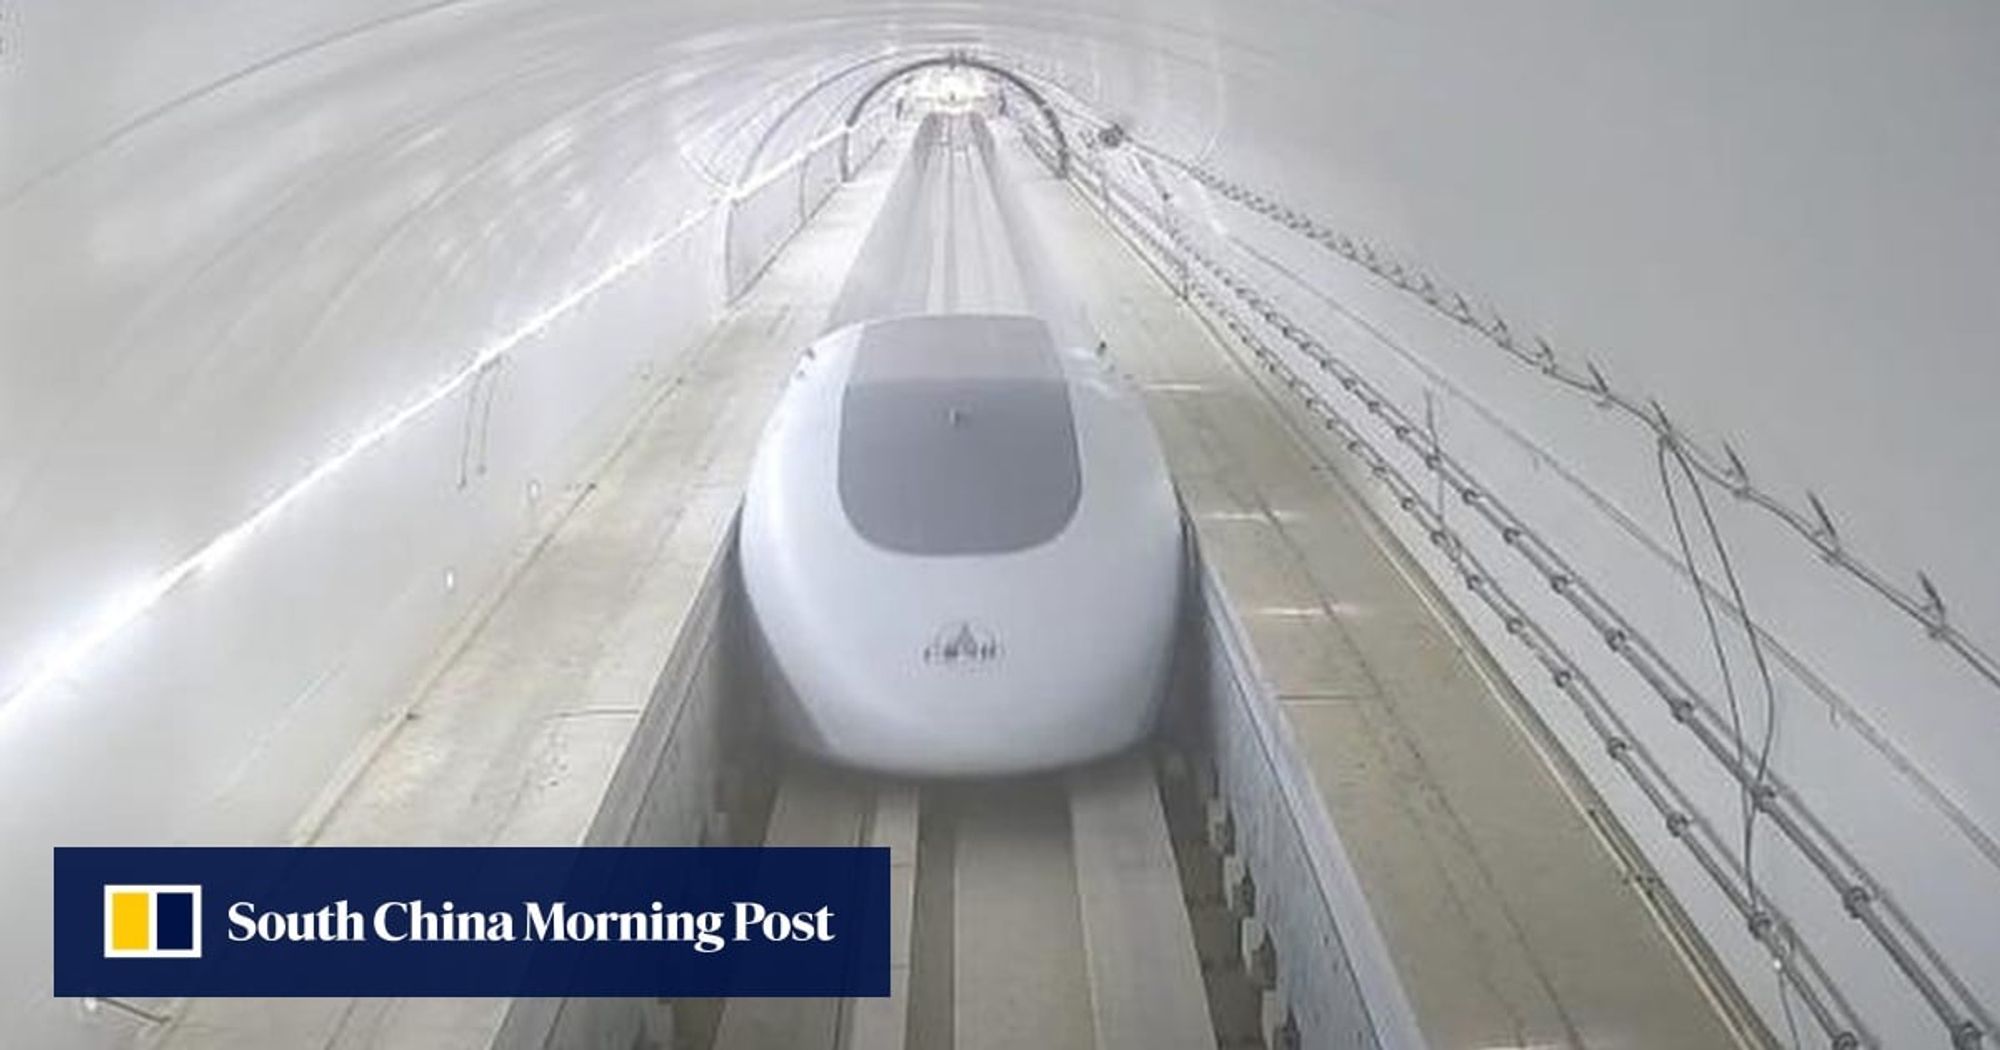 Breakthrough in China hyperloop project aiming to transport people at 1,000km/h